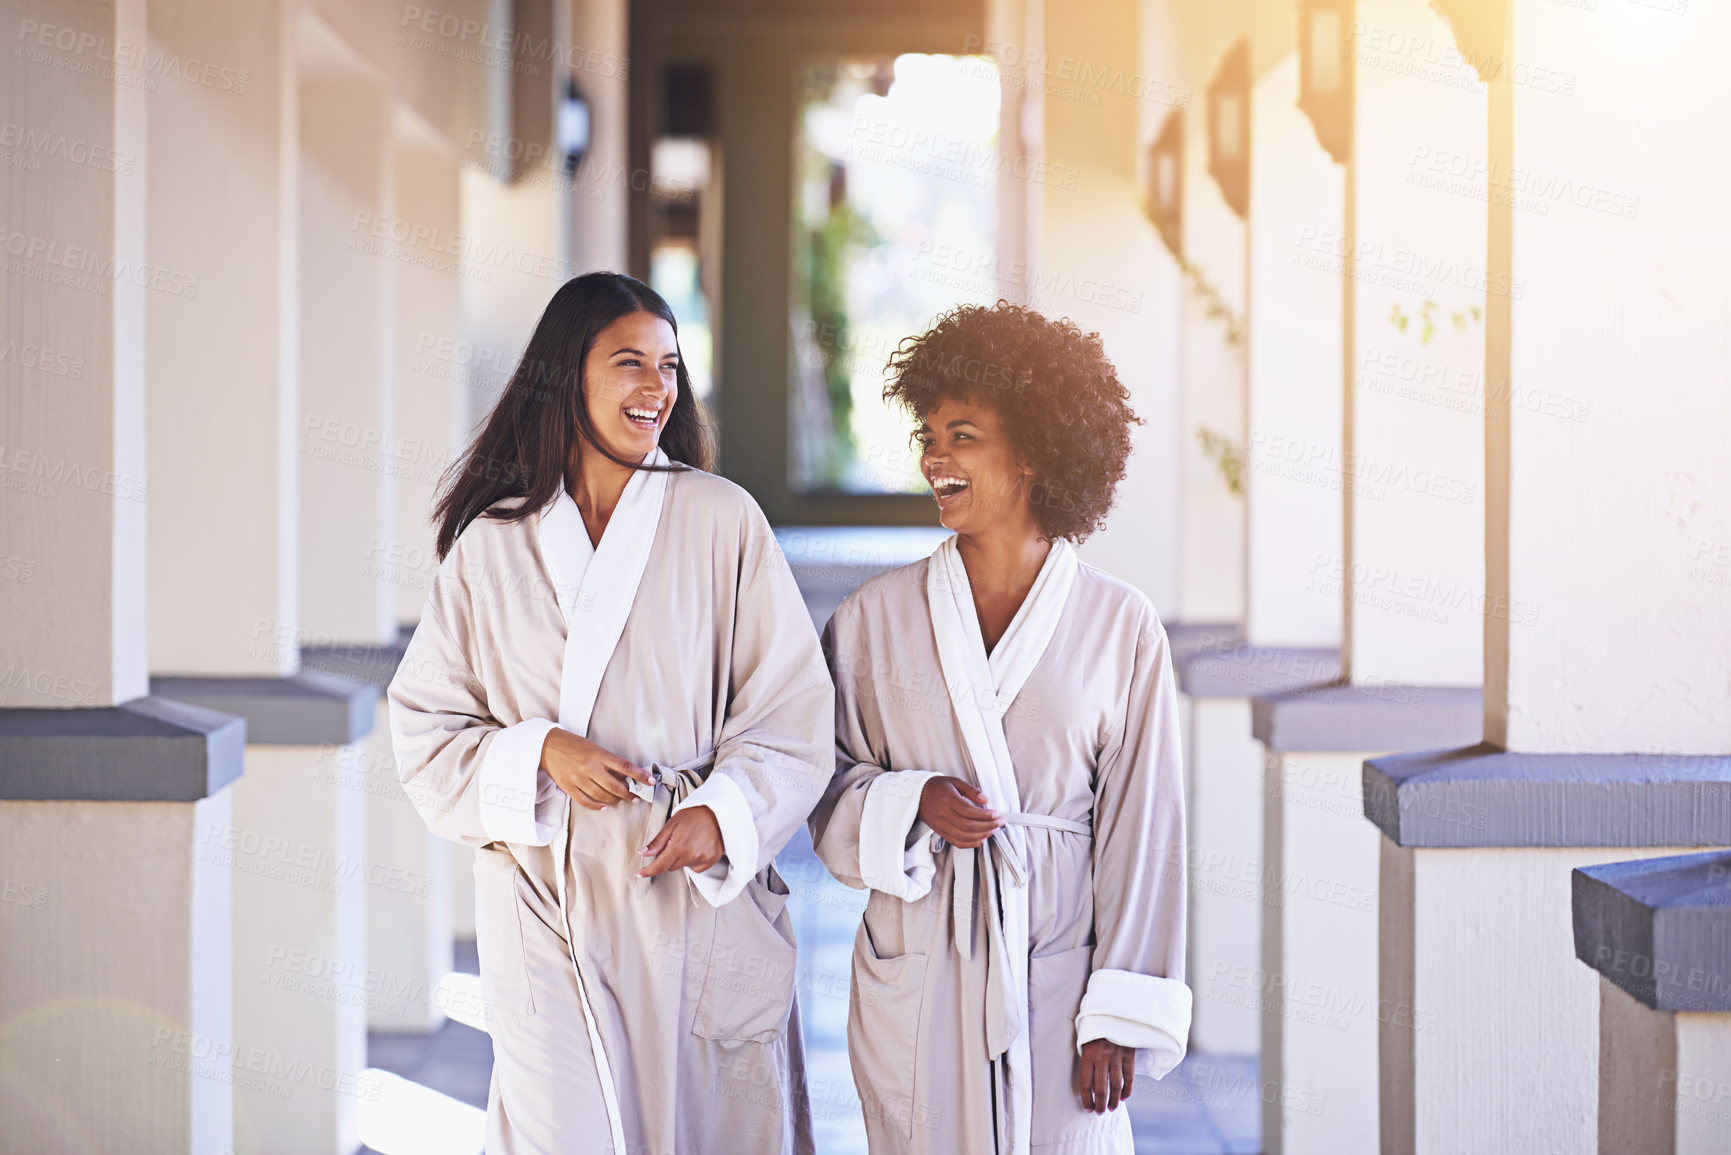 Buy stock photo Shot of two young women enjoying a relaxing day at the spa